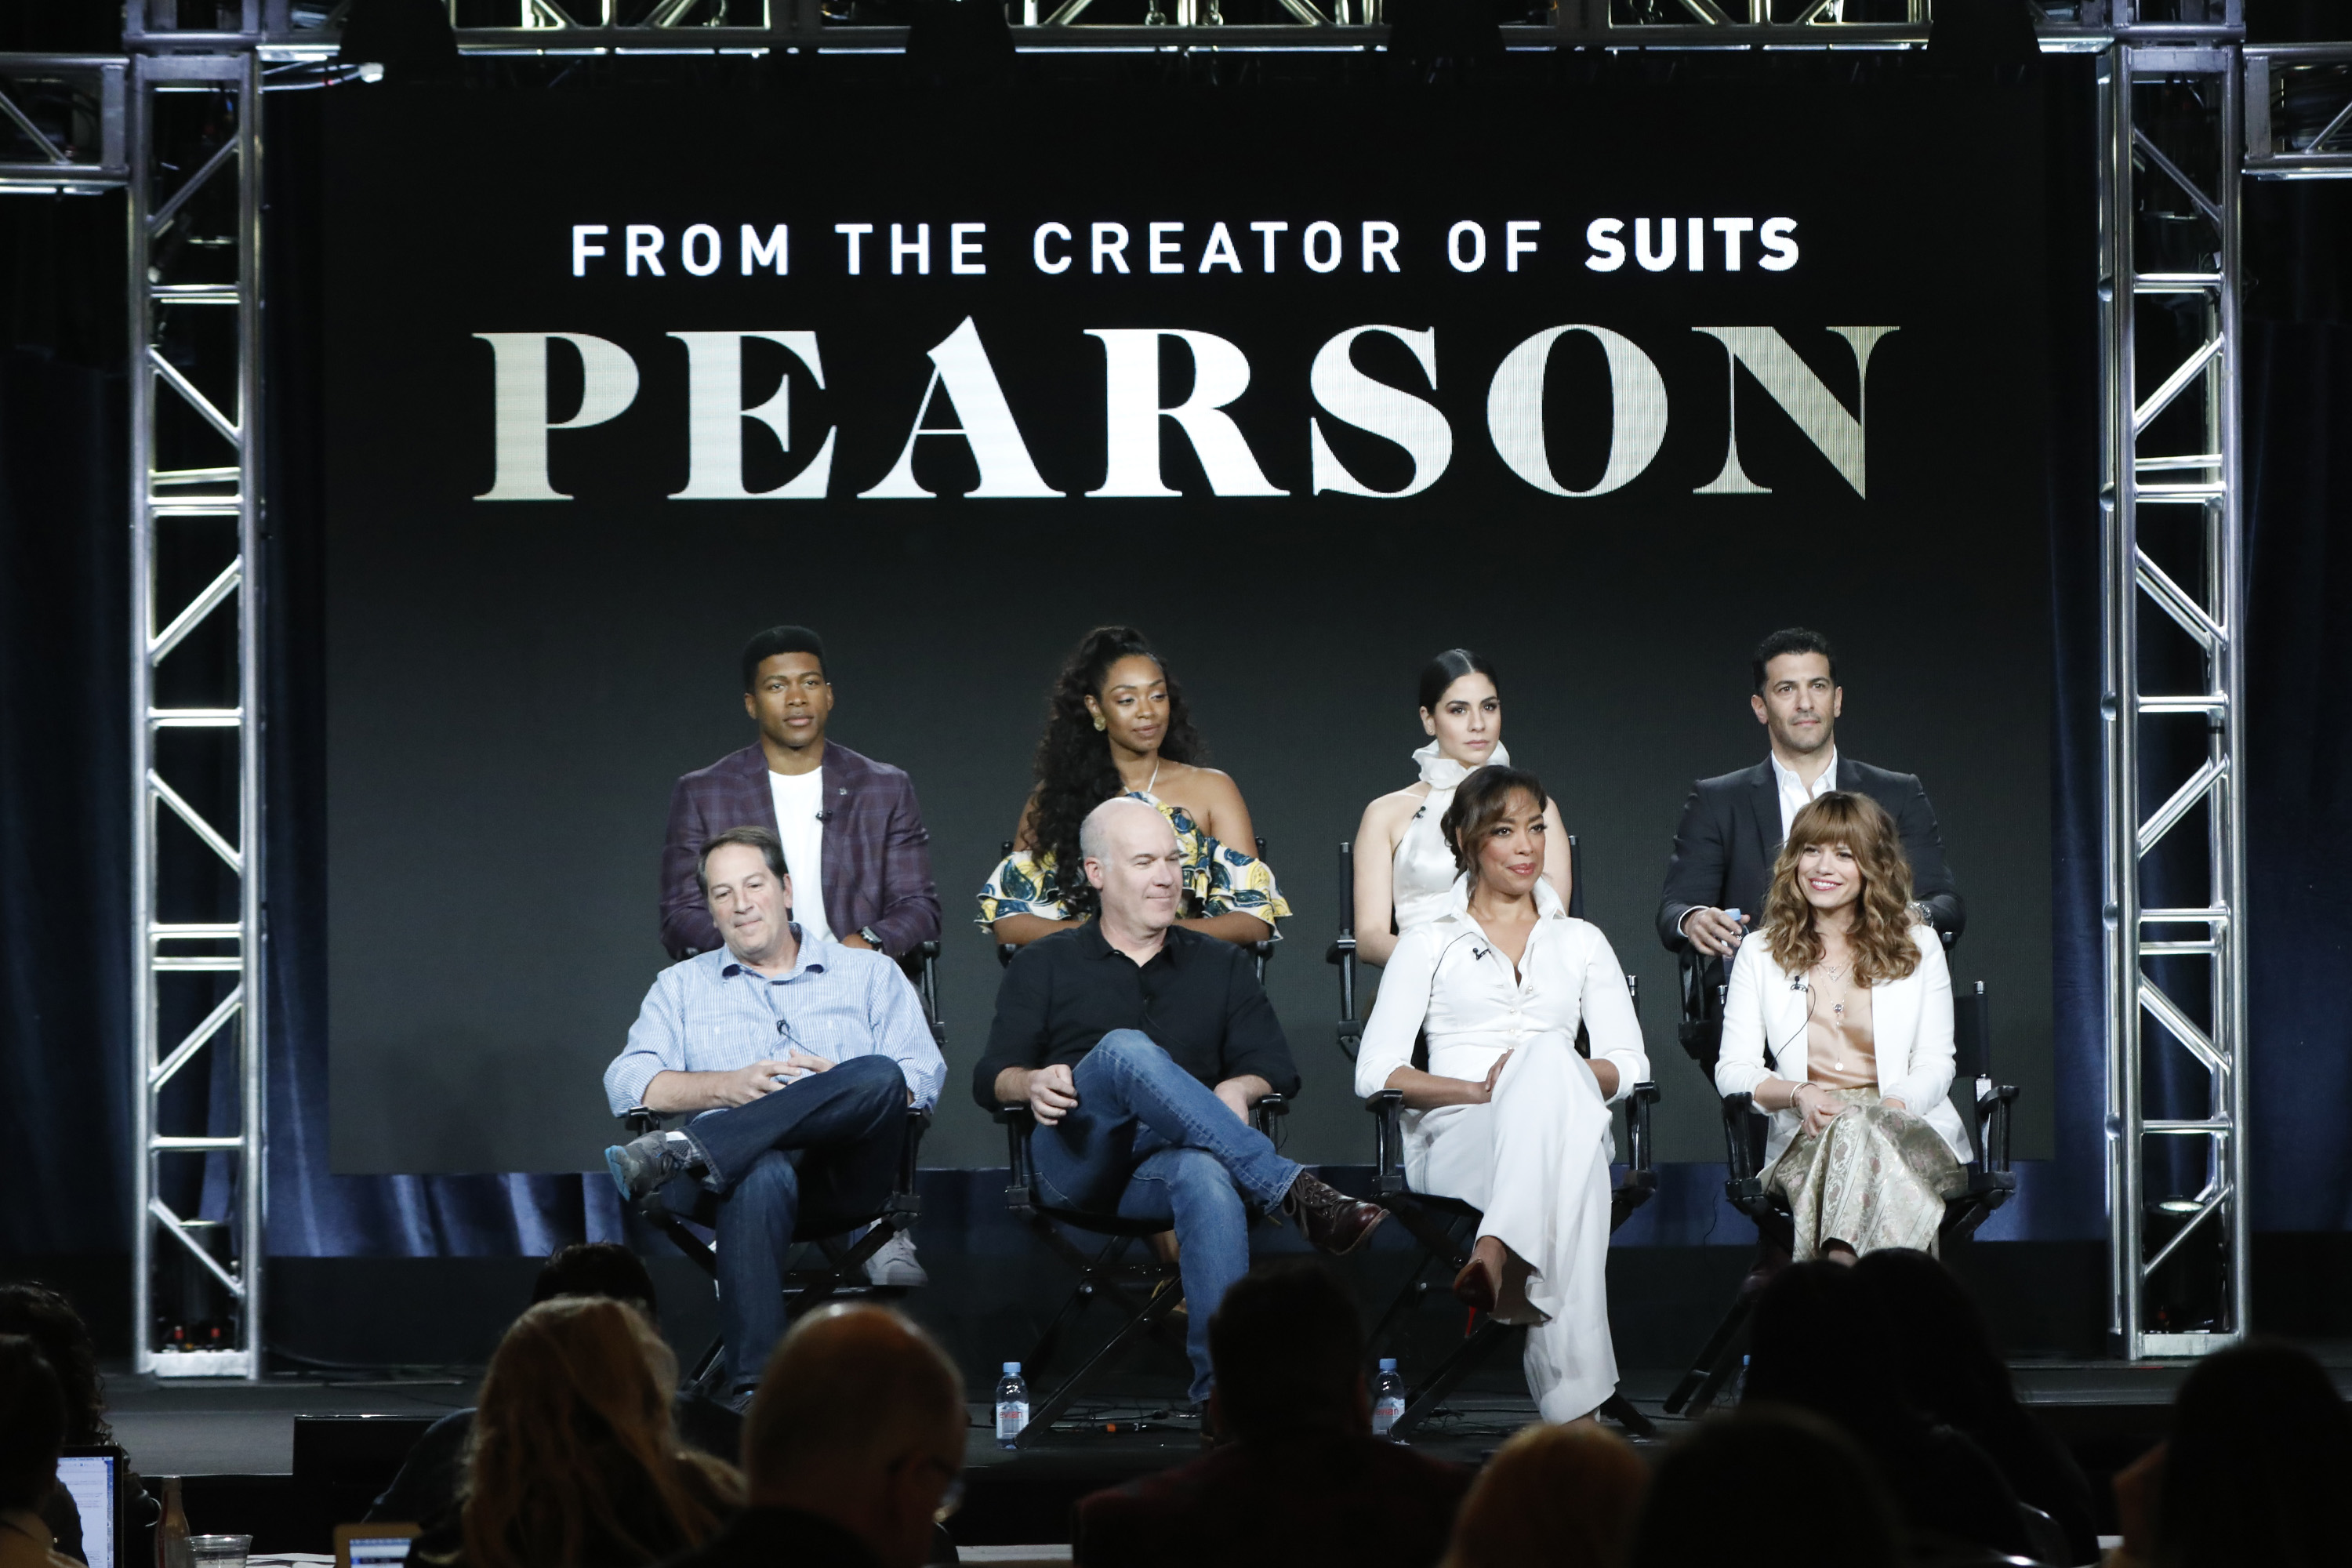 NBCUNIVERSAL EVENTS -- NBCUniversal Press Tour, January 2019 -- USA Network's "Pearson" Panel -- Pictured: (l-r) Eli Goree; Chantel Riley; Isabel Arraiza; Simon Kassianides; Aaron Korsh, Executive Producer; Daniel Arkin, Executive Producer & Showrunner; Gina Torres, Co-Executive Producer; Bethany Joy Lenz, USA Network's "Pearson" -- (Photo by: Evans Vestal Ward/NBCUniversal)